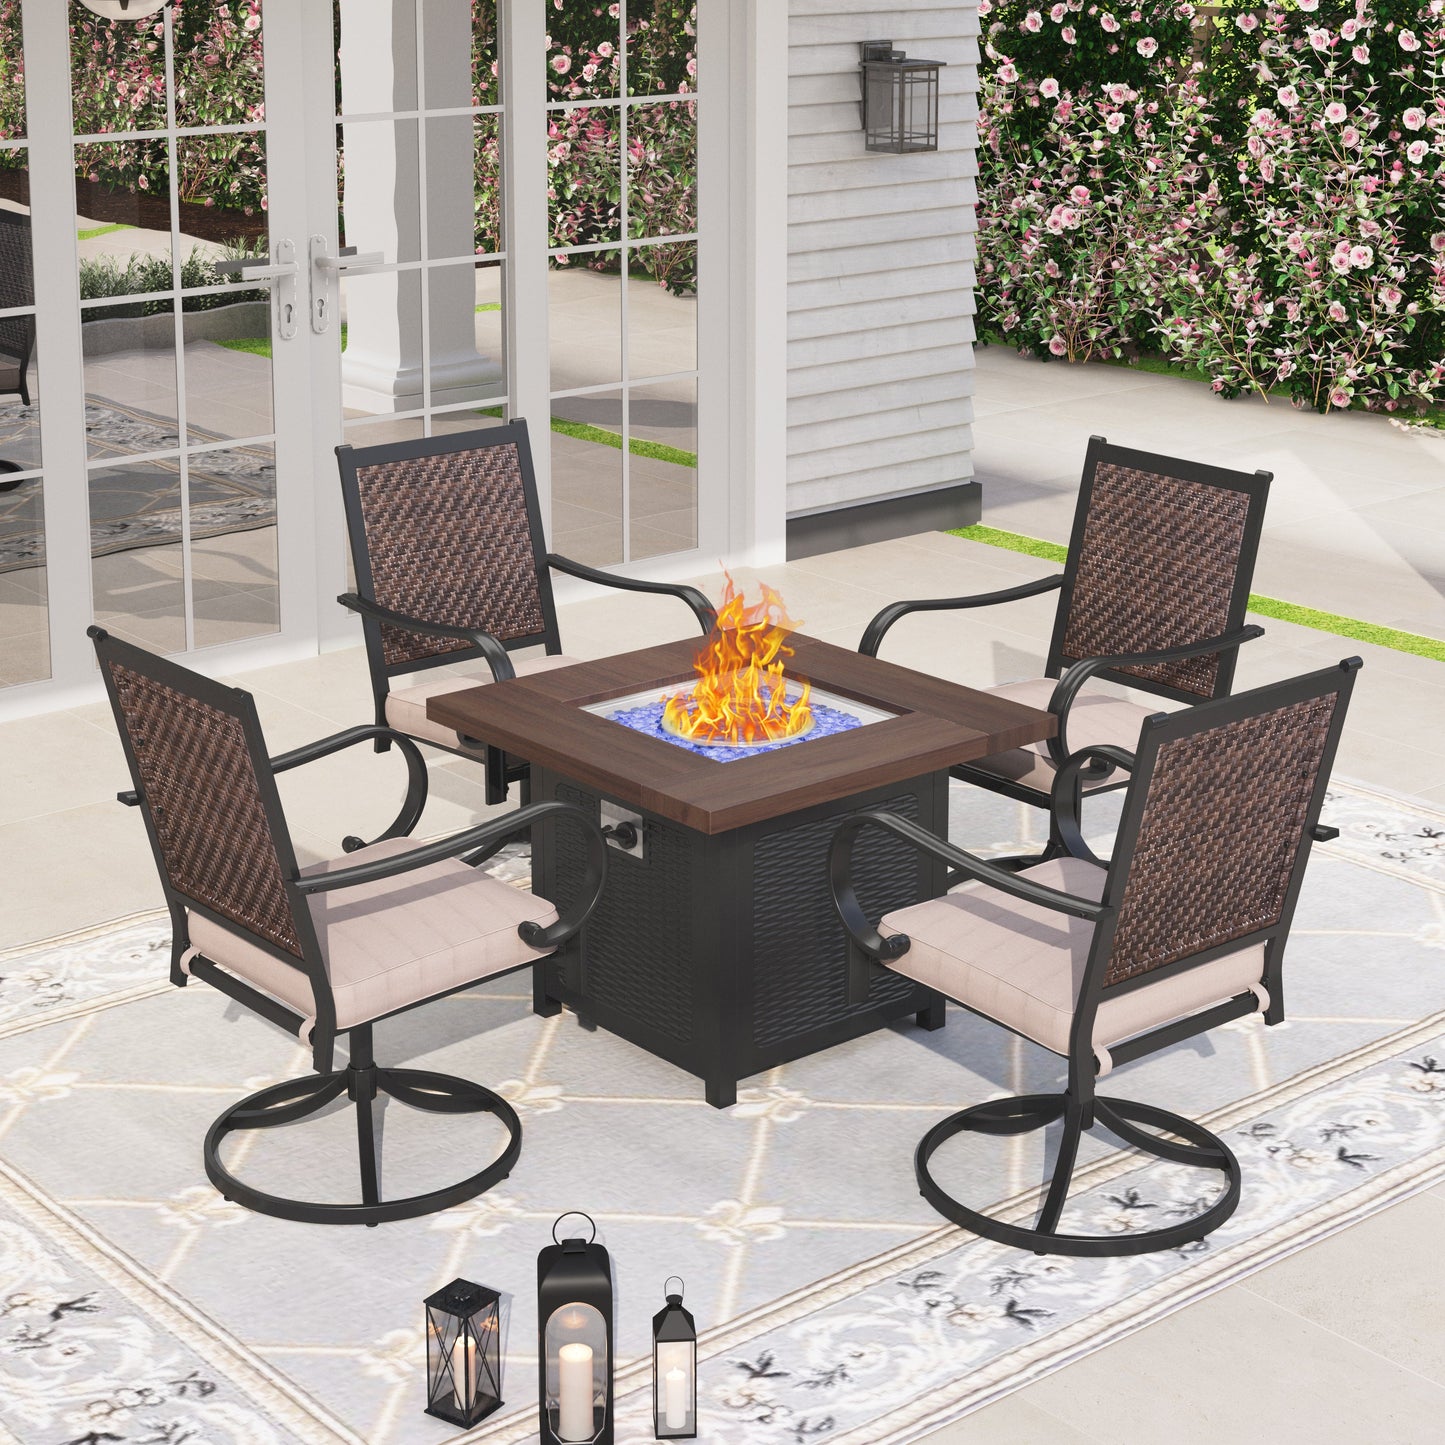 Sophia & William 5 Pieces Outdoor Patio Dining Set Wicker Swivel Chairs and Fire Pit Table